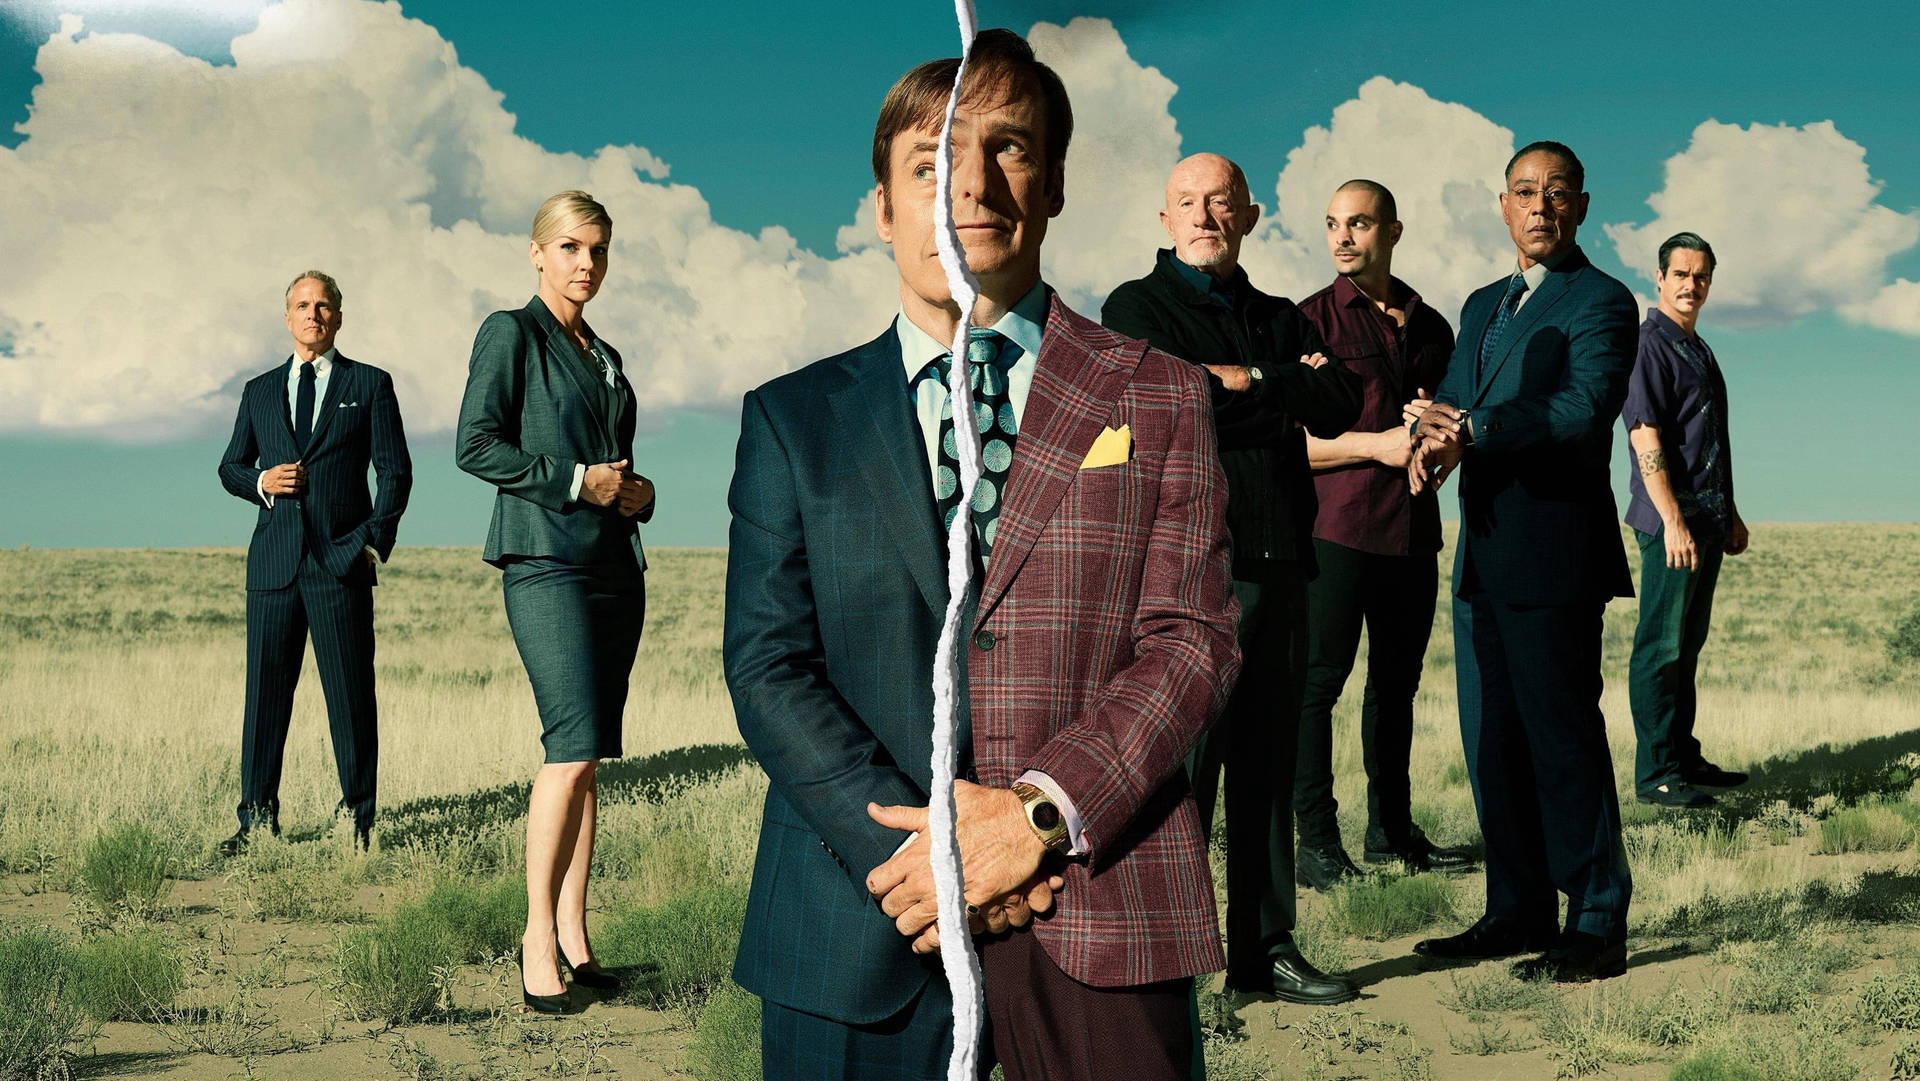 Main Characters Of Better Call Saul Series In An Intense Meeting Background